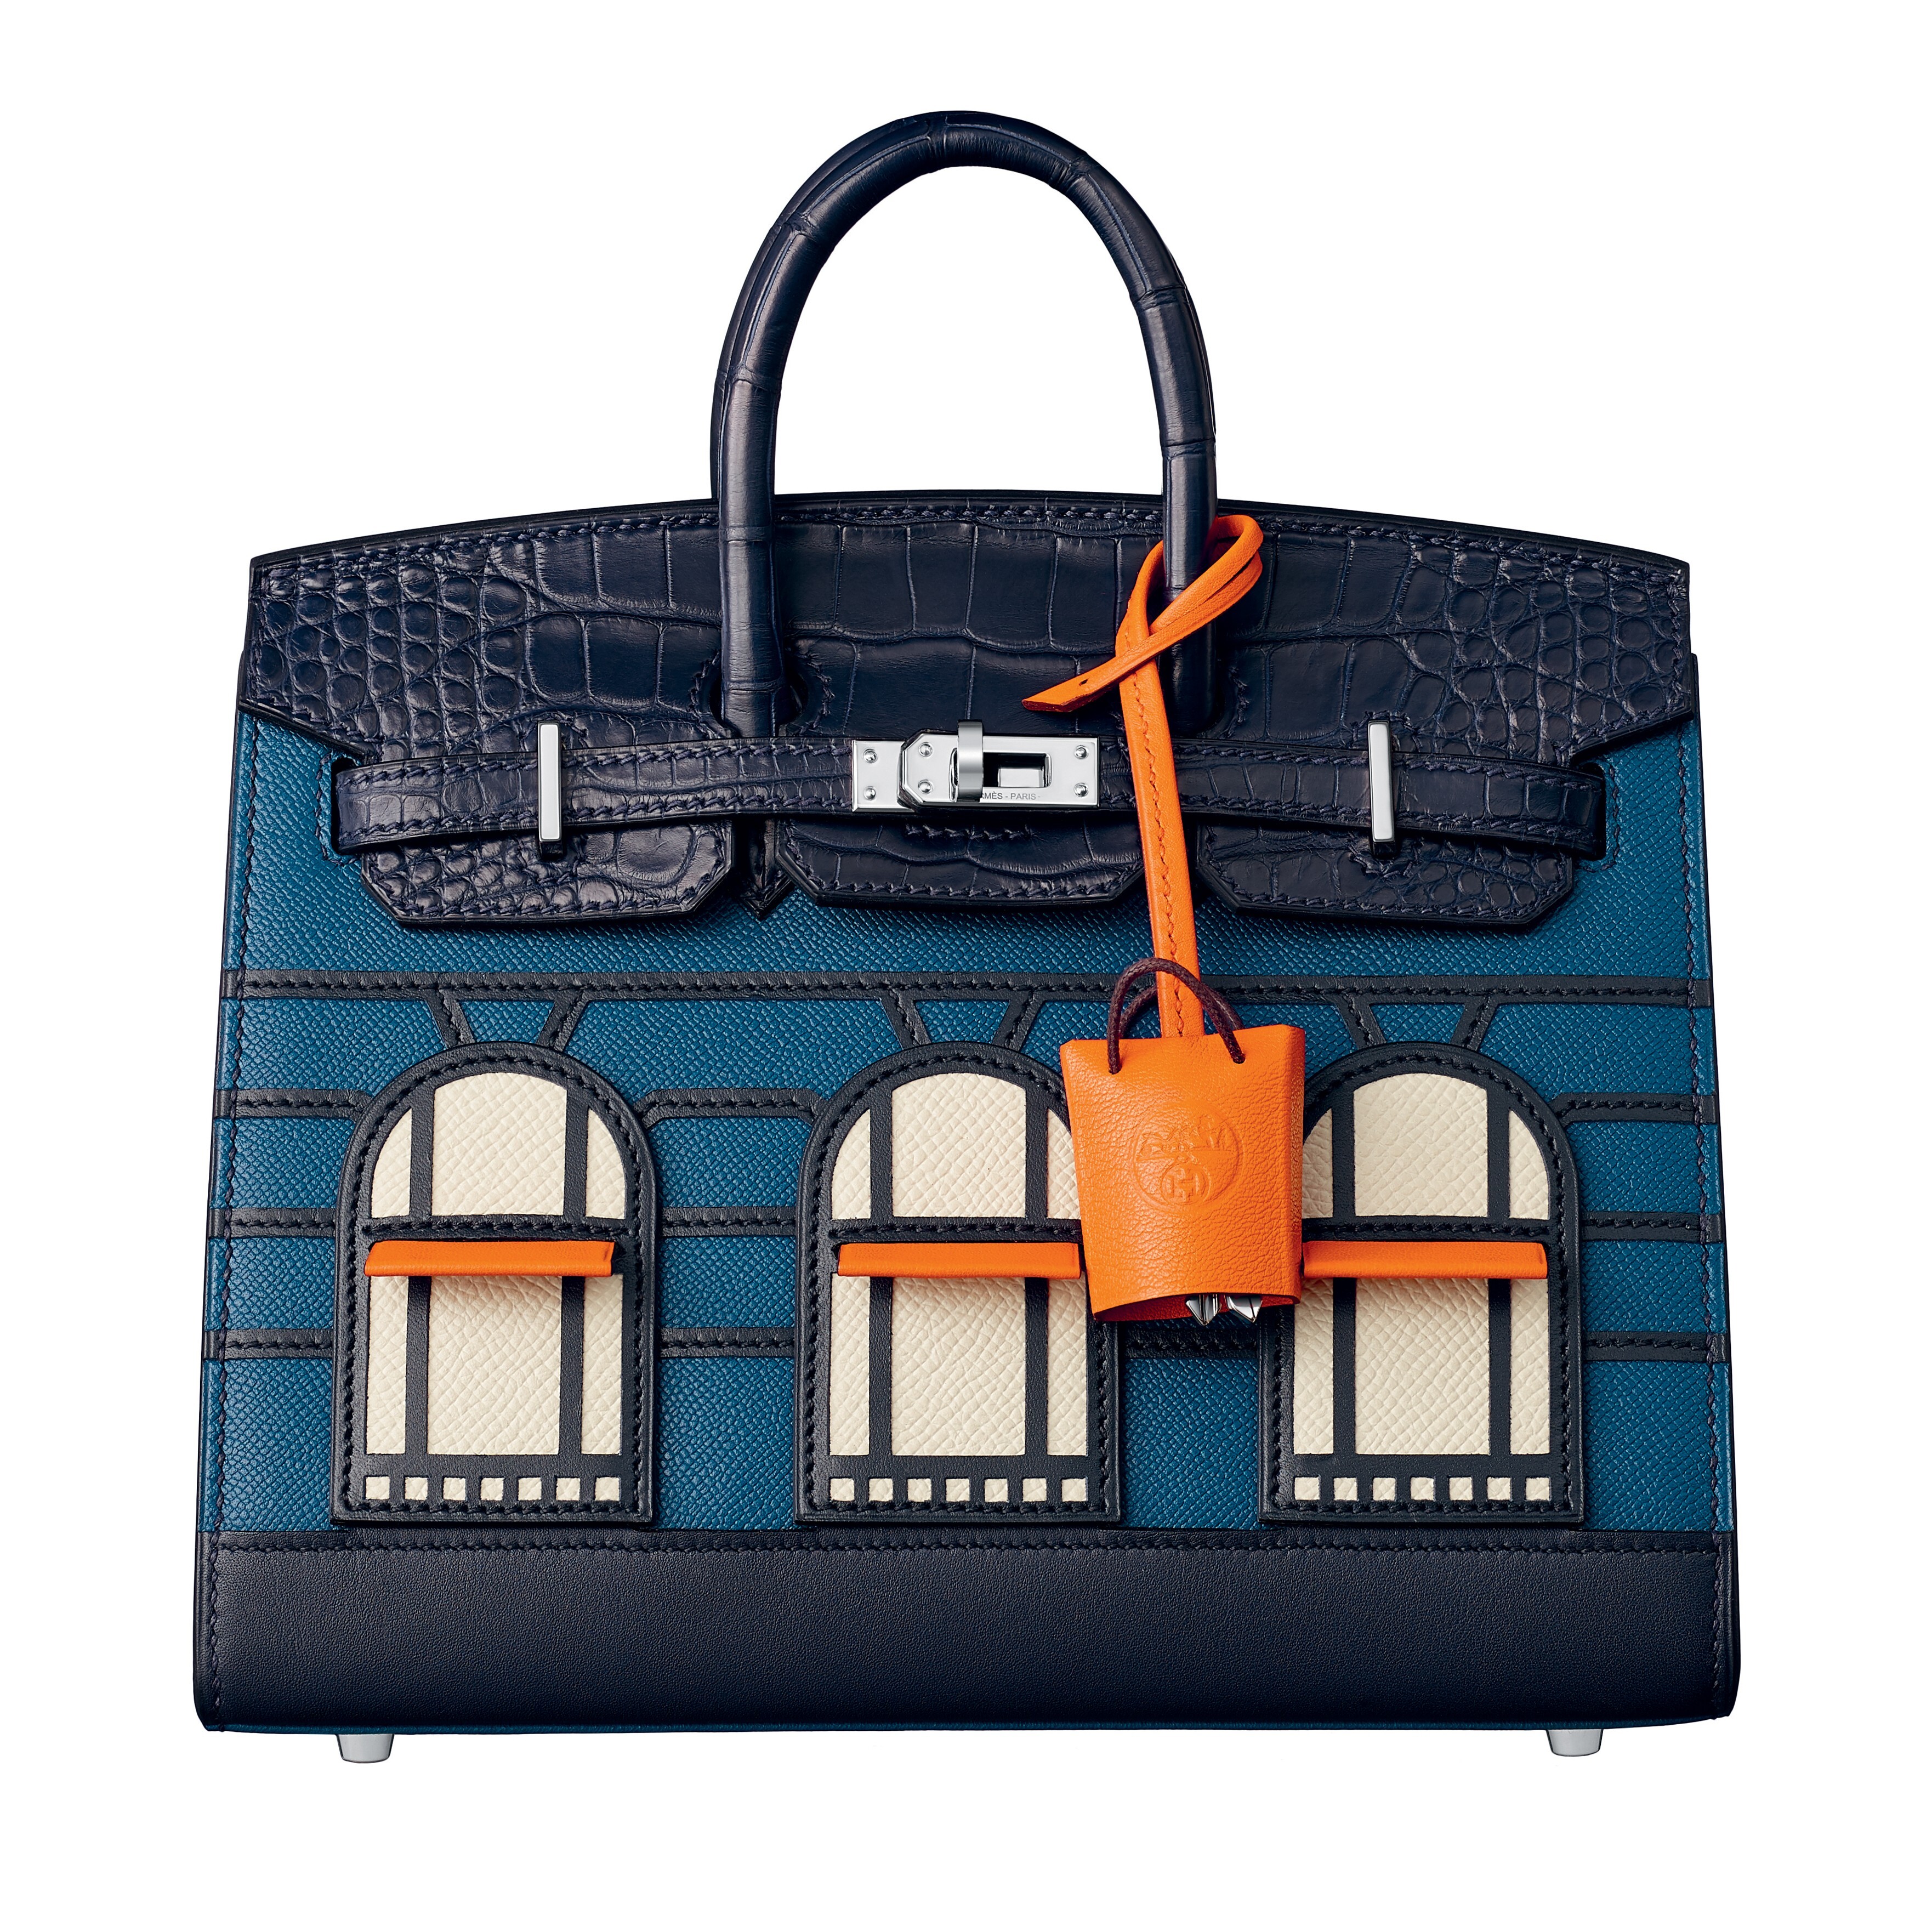 Hermès crafts some of the most sought after handbags in the world and their value seems to ride over any downturn. Photo: handout